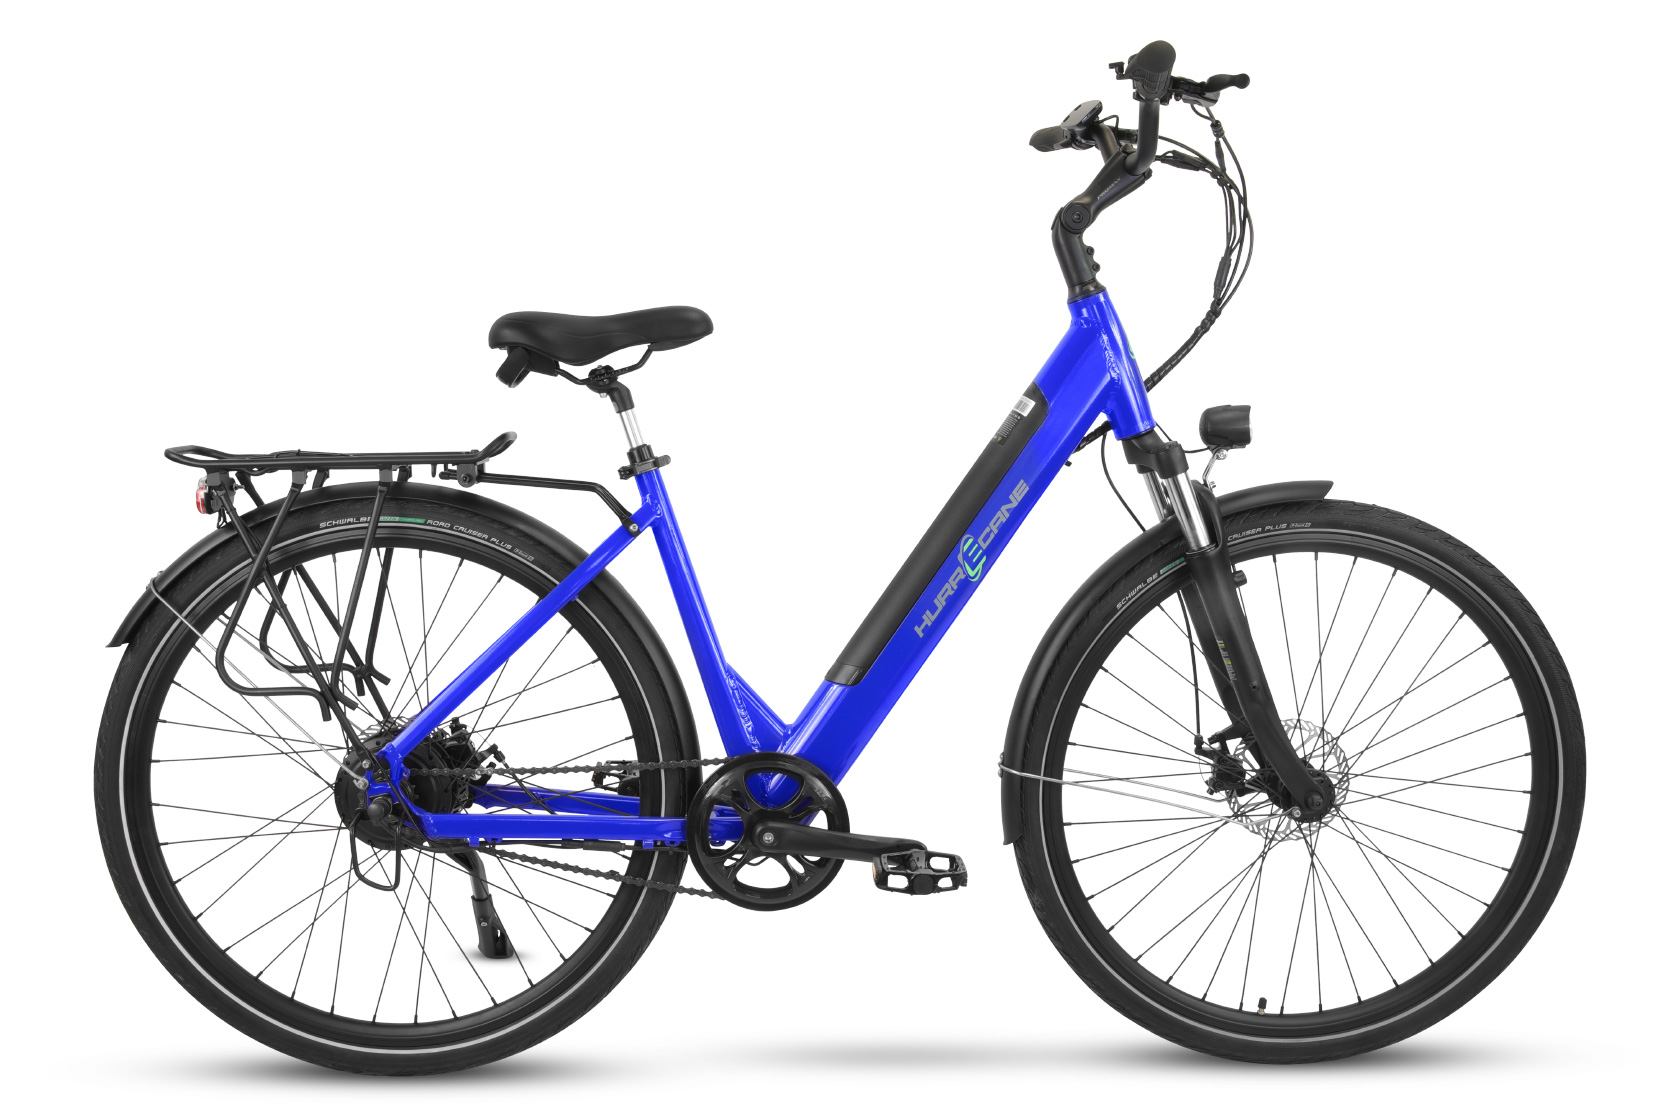 F400 Special Edition Blue eBike